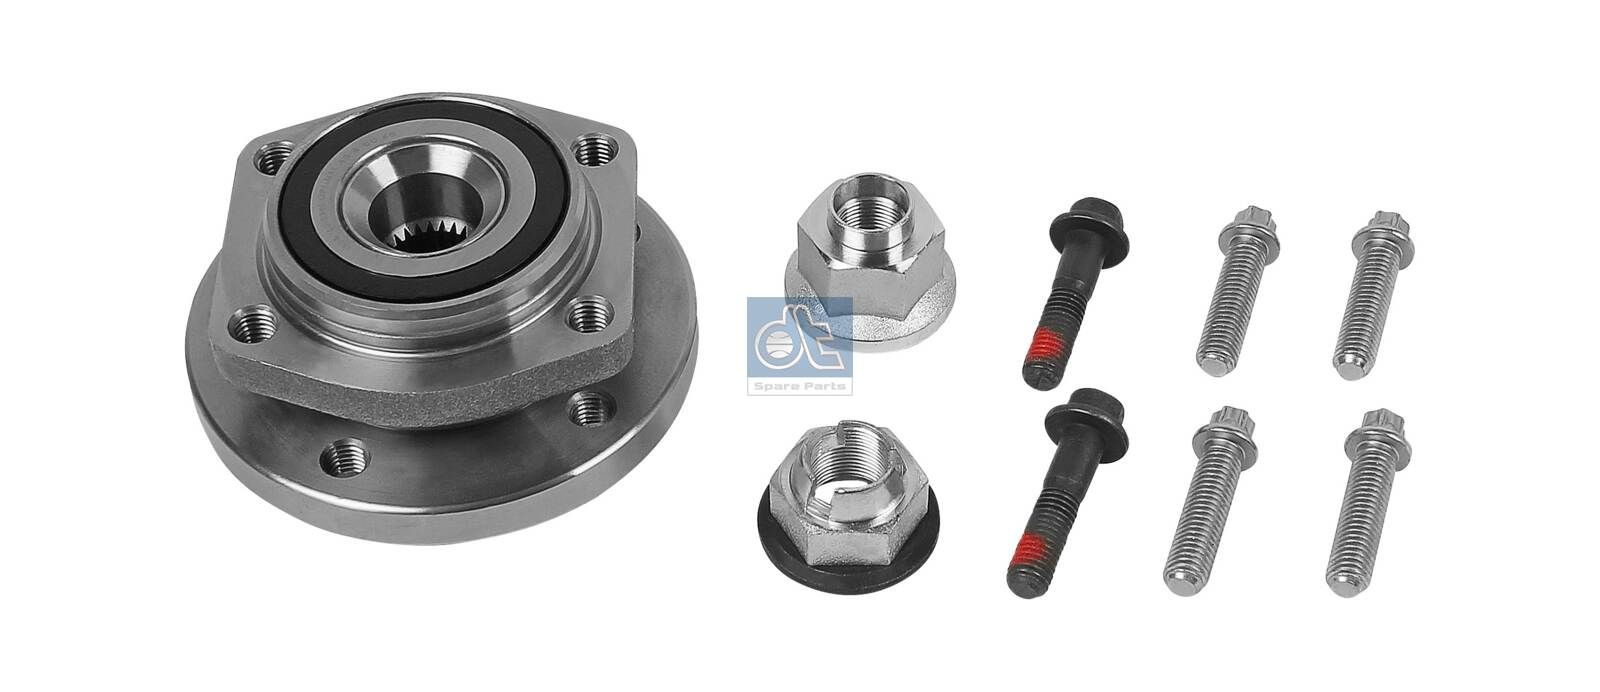 DT Spare Parts 2.15425 Wheel bearing kit 2717 86